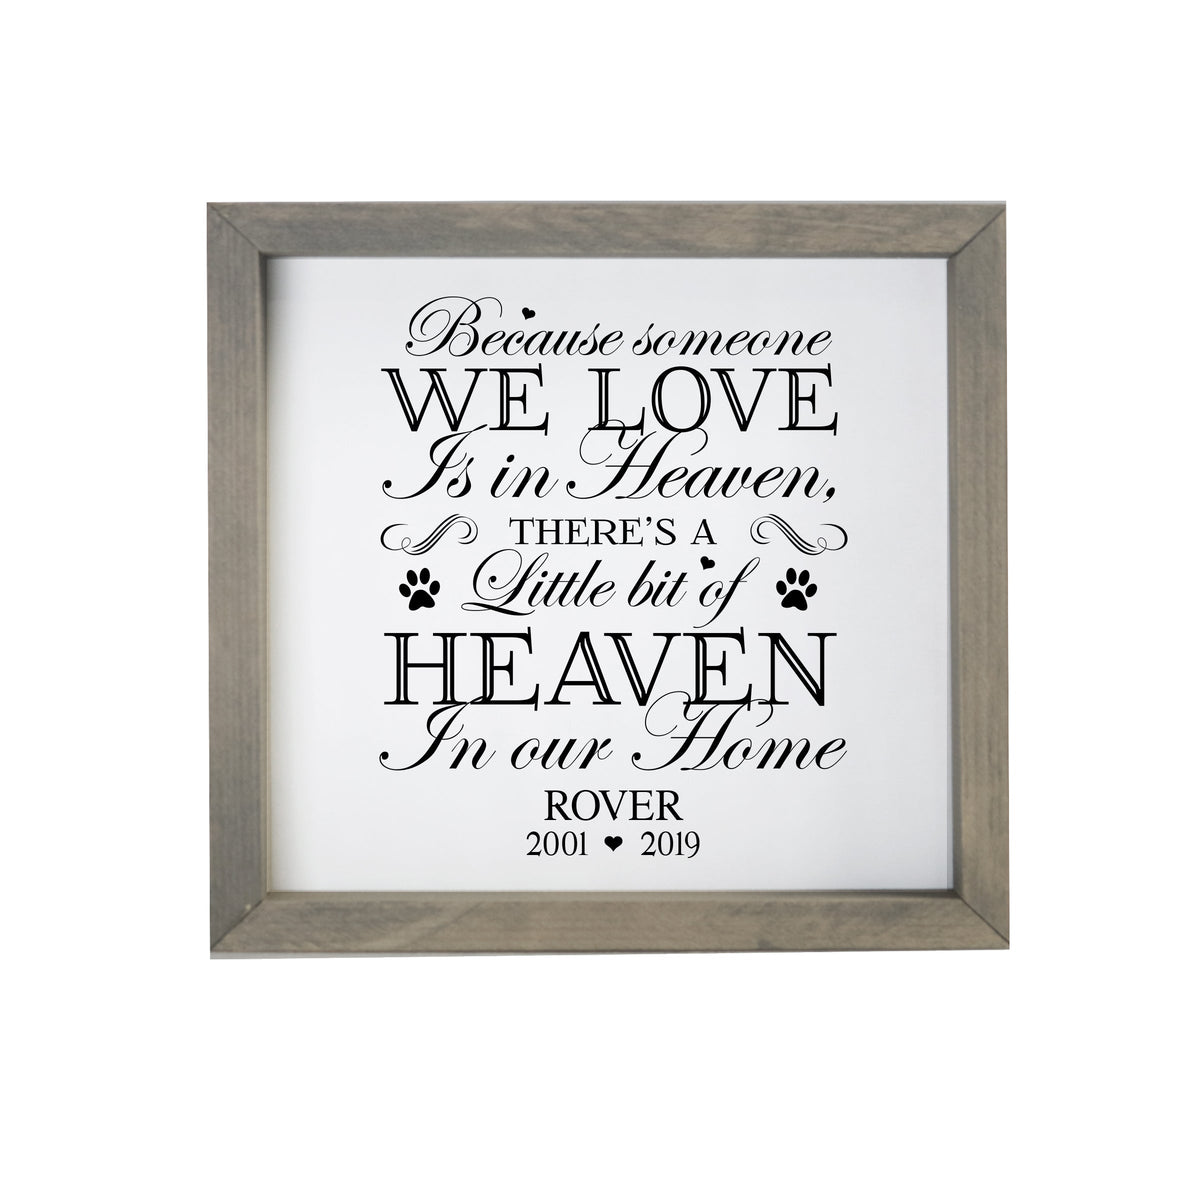 11.5x11.5 Grey Framed Pet Memorial Shadow Box with phrase &quot;Because Someone We Love&quot;